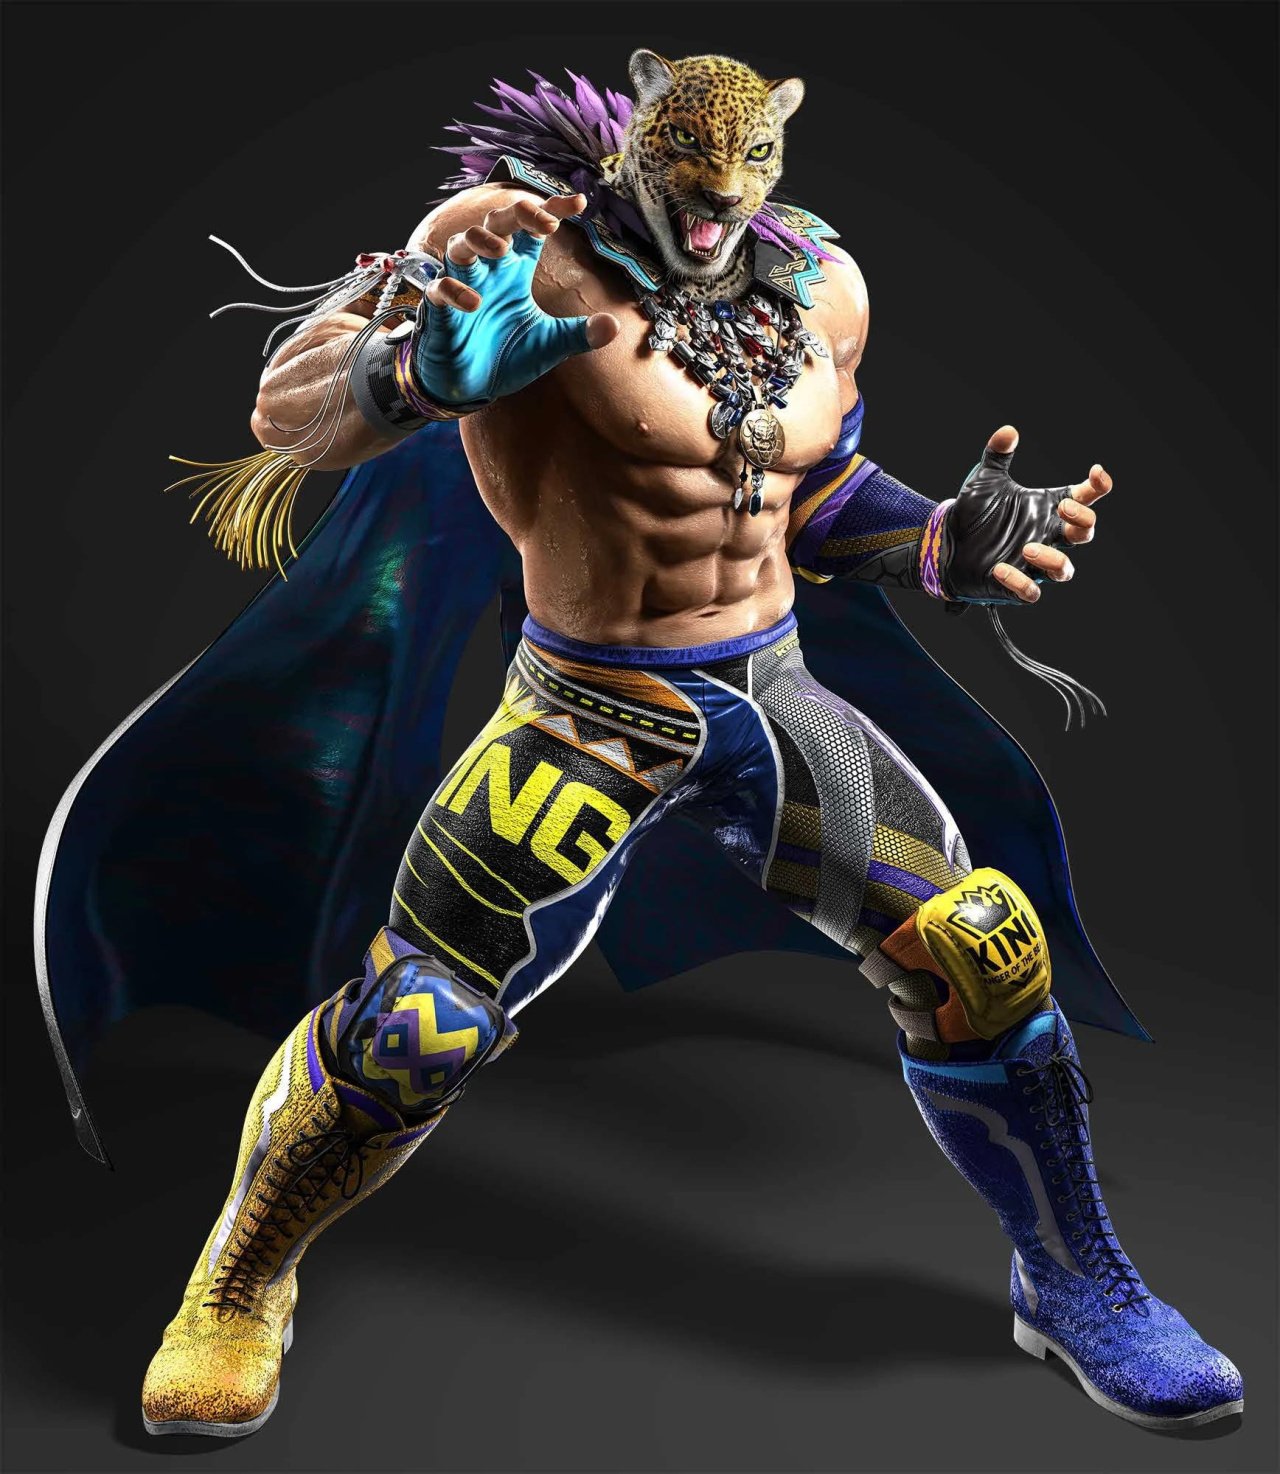 Gallery: Meet Tekken 8's Grizzly PS5 Roster So Far with Official Art